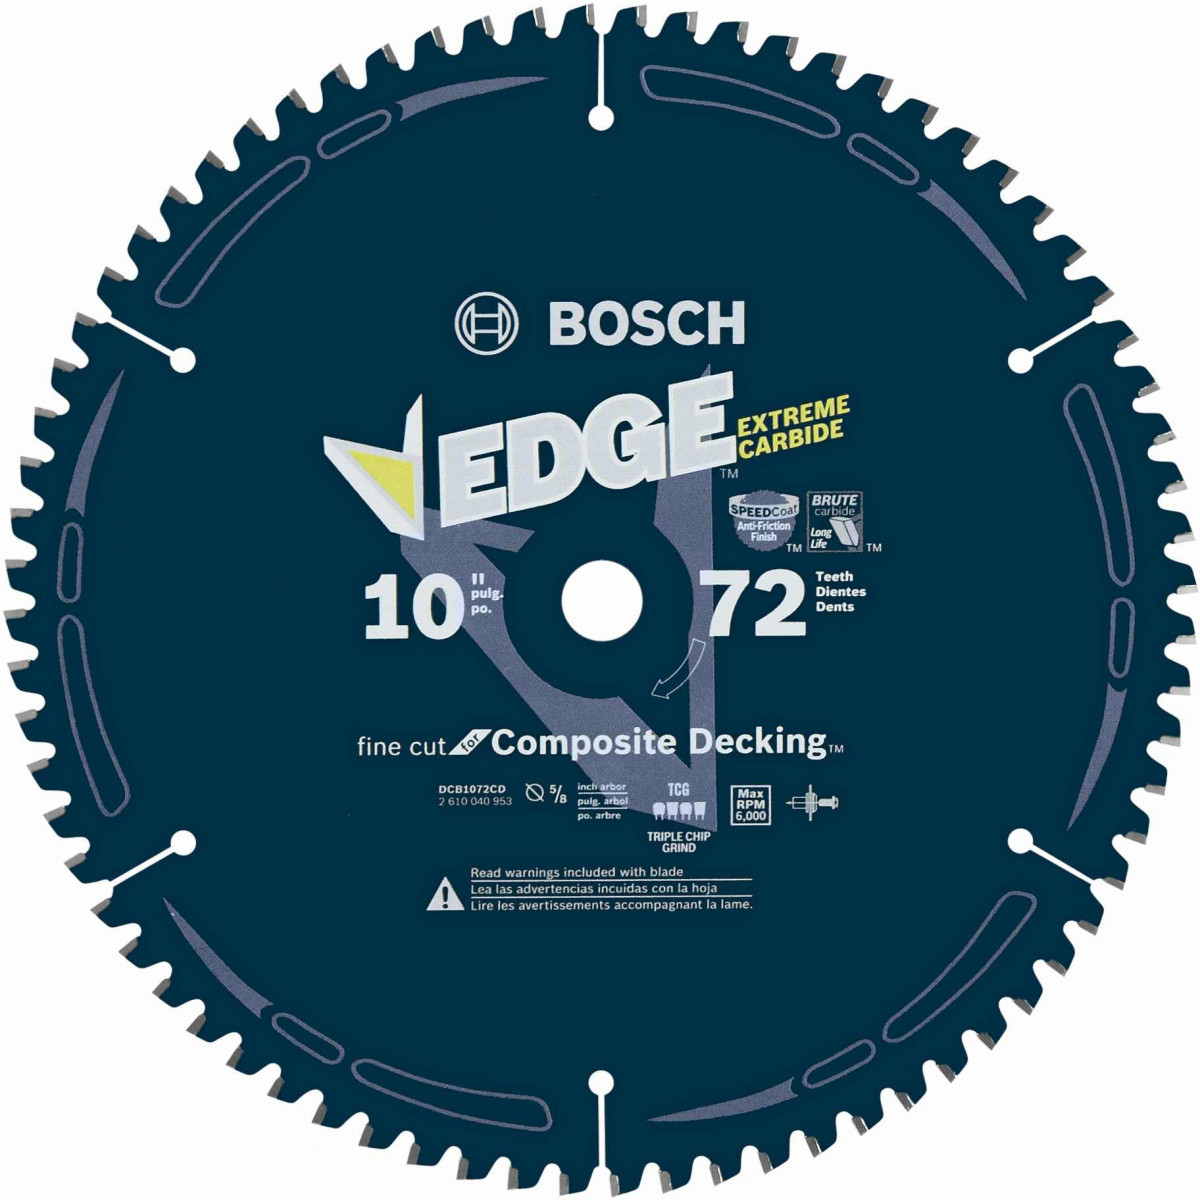 Bosch Dcb1072cd 10 72 Tooth Edge Circular Saw Blade For Composite within size 1200 X 1200